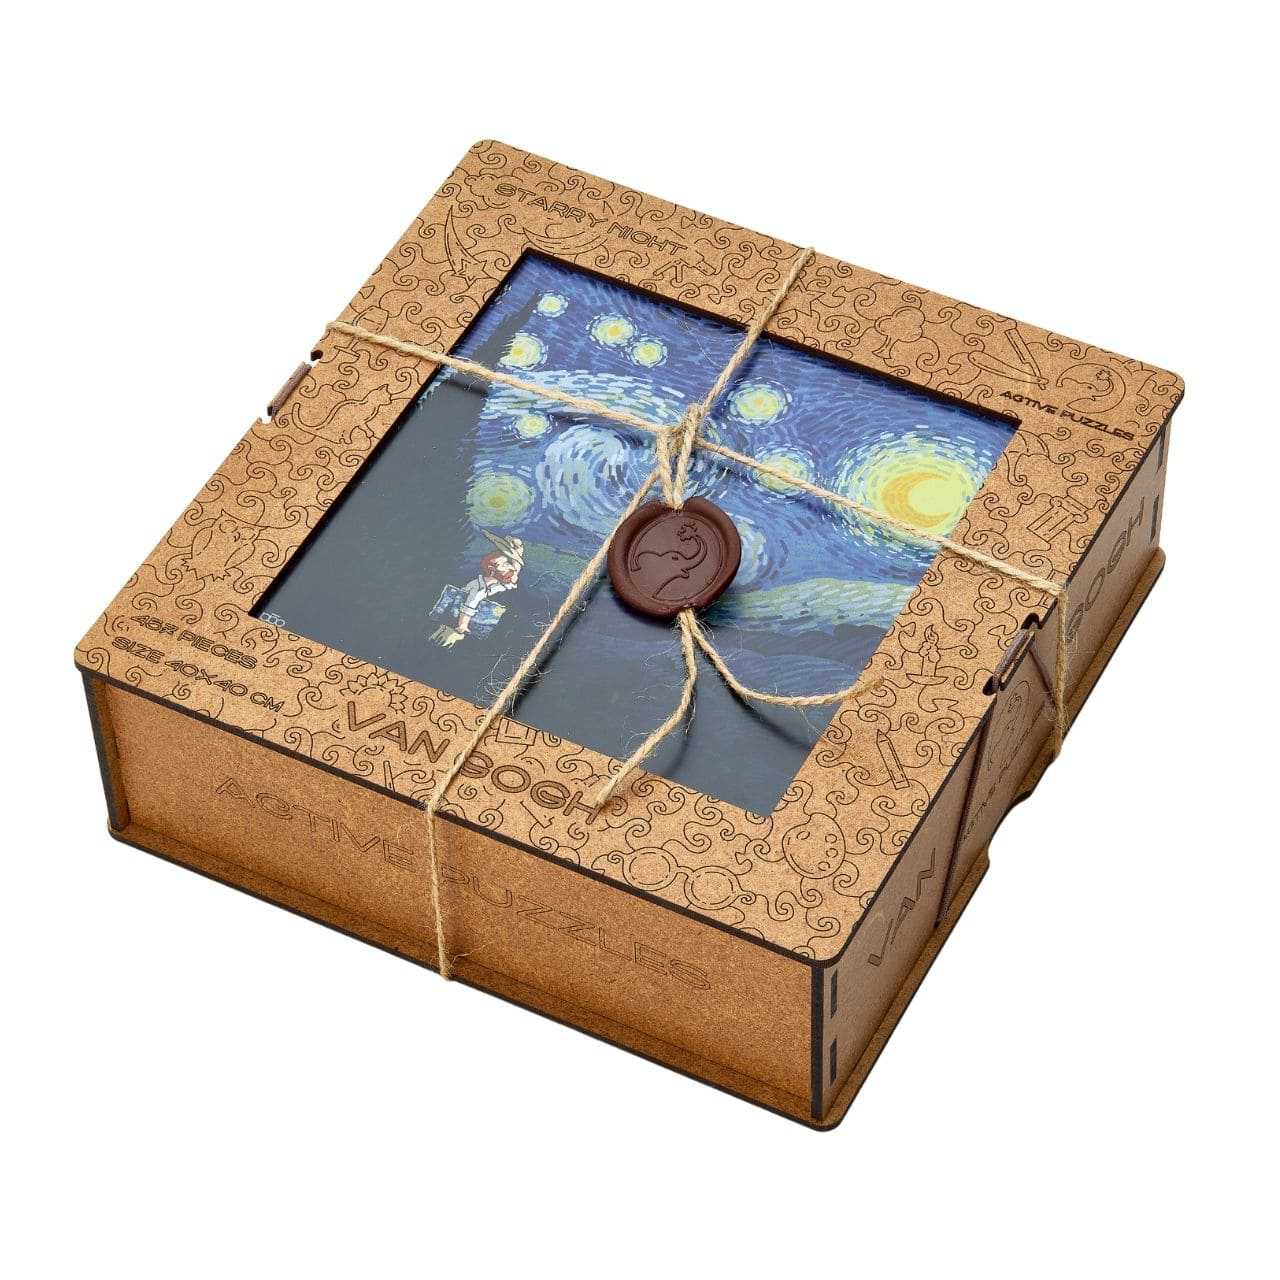 Starry night wooden puzzles box